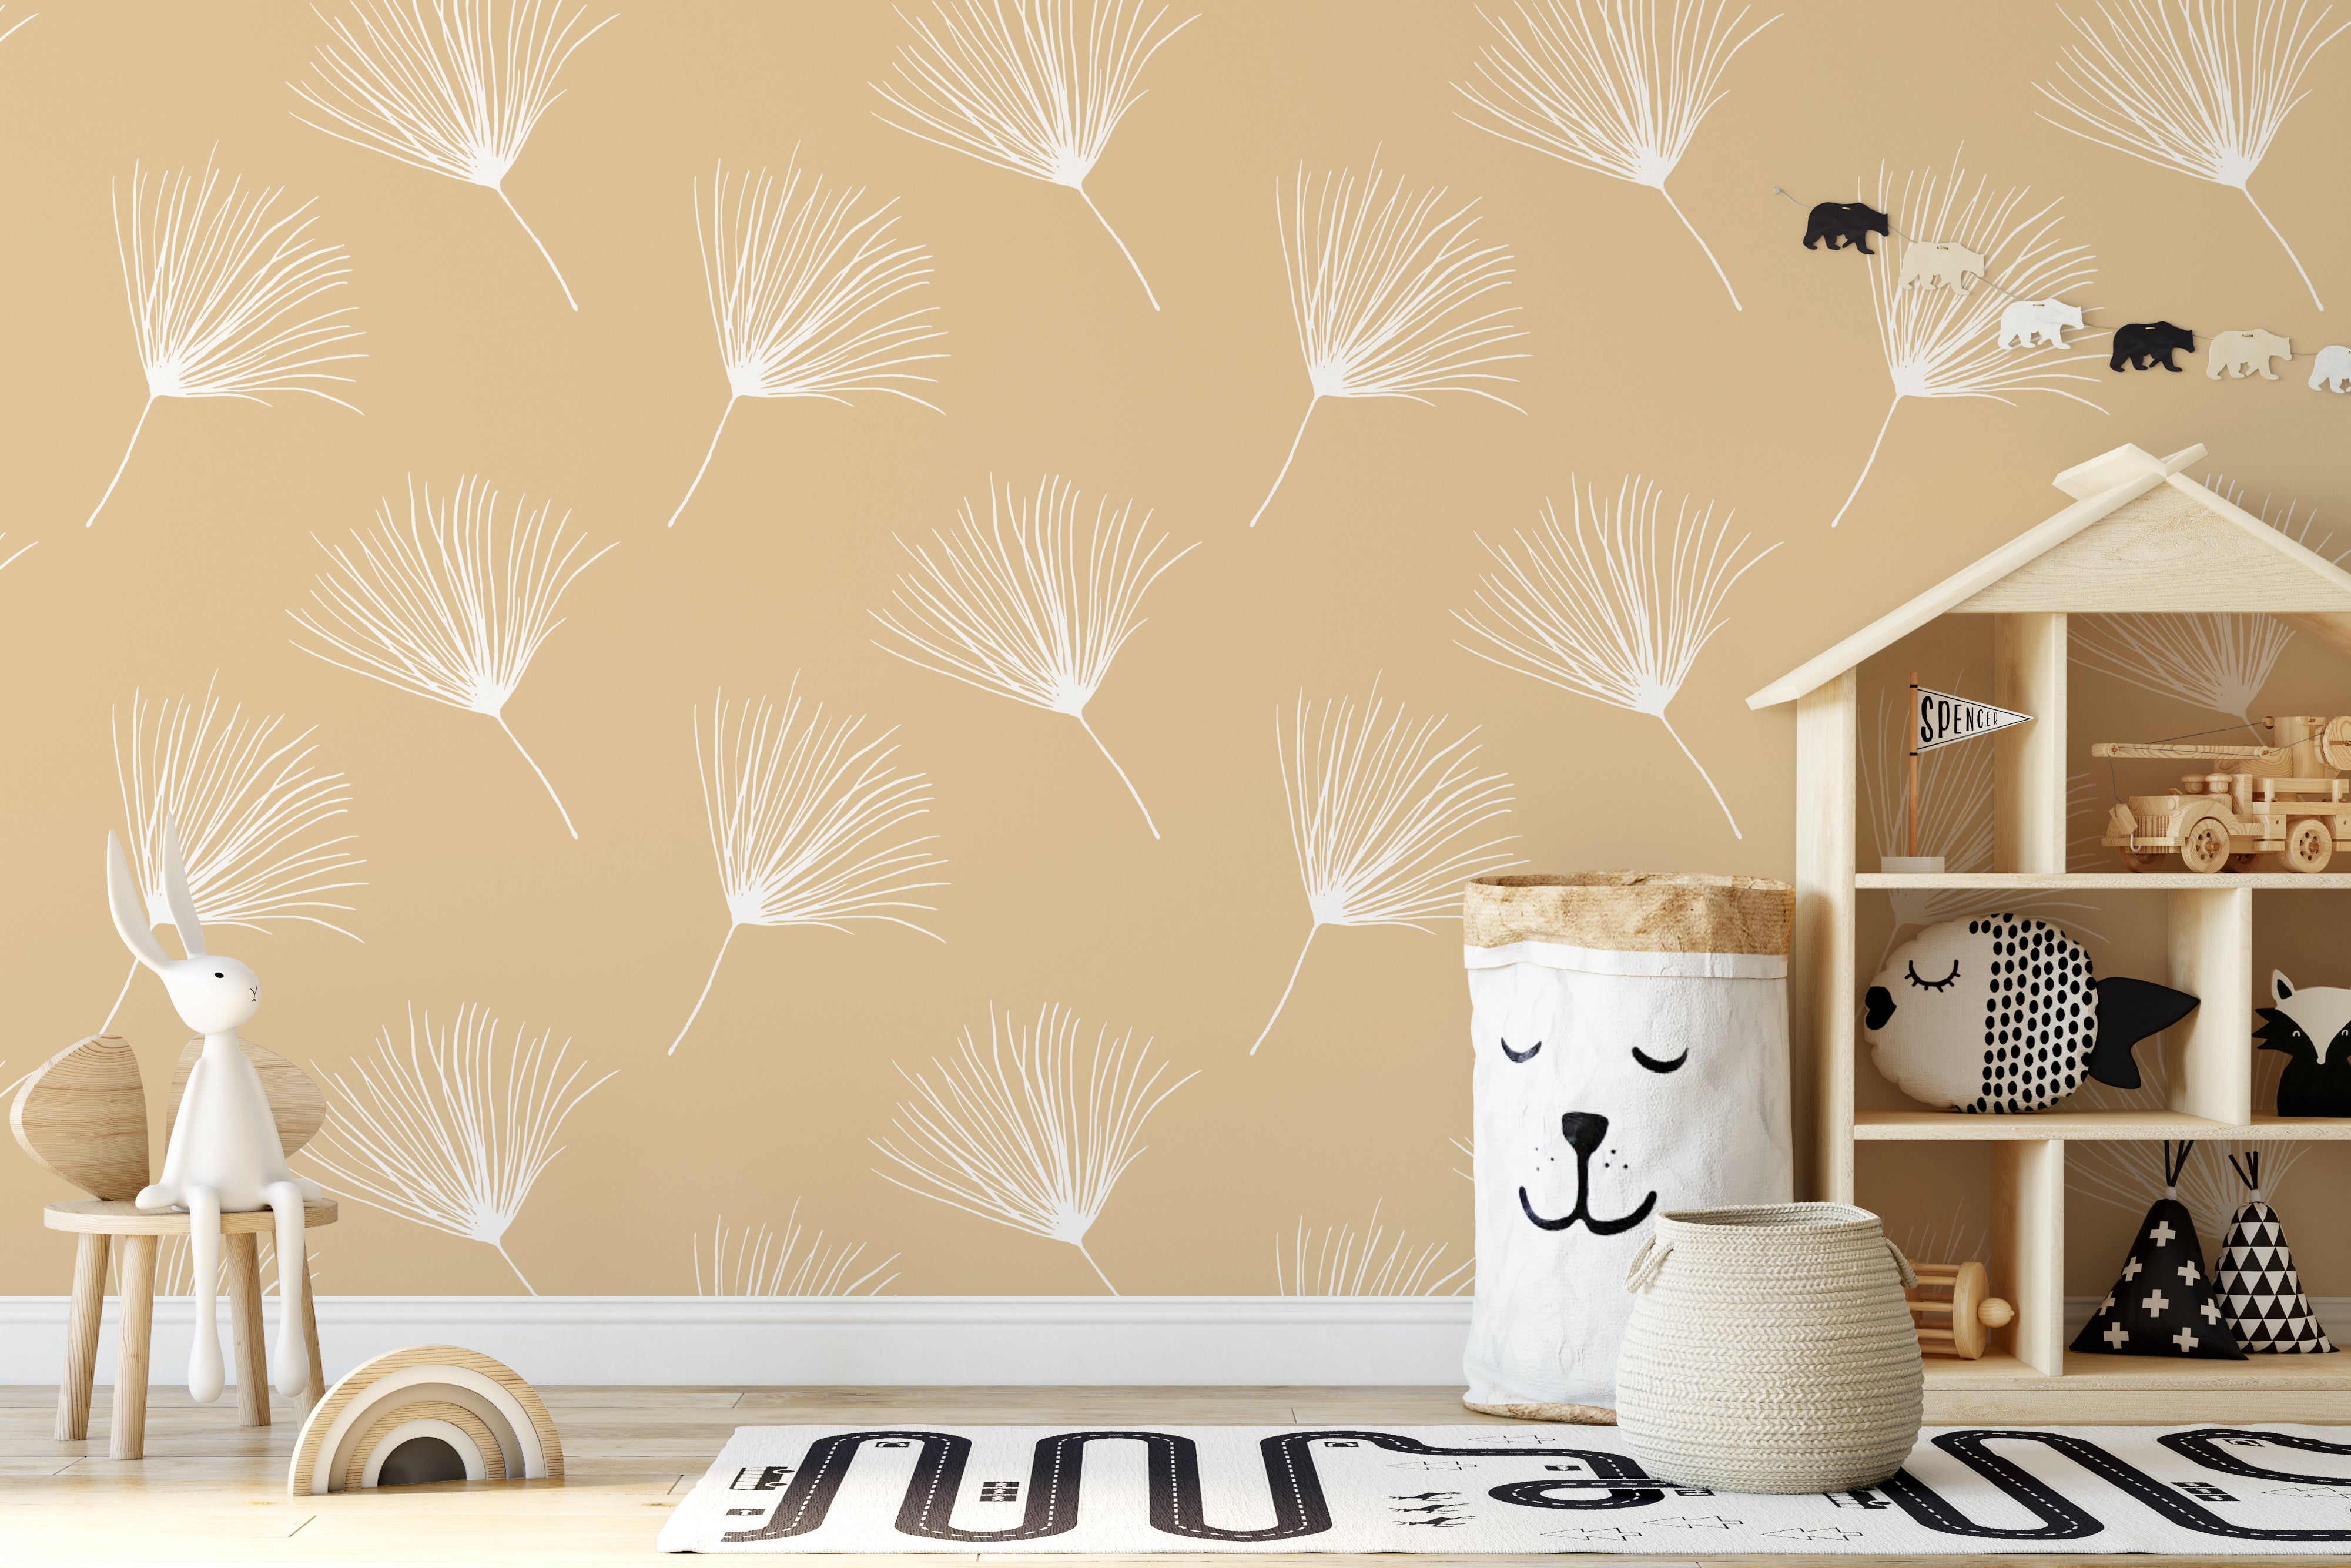 Wish Wallpaper - The Minty Line from WALL BLUSH